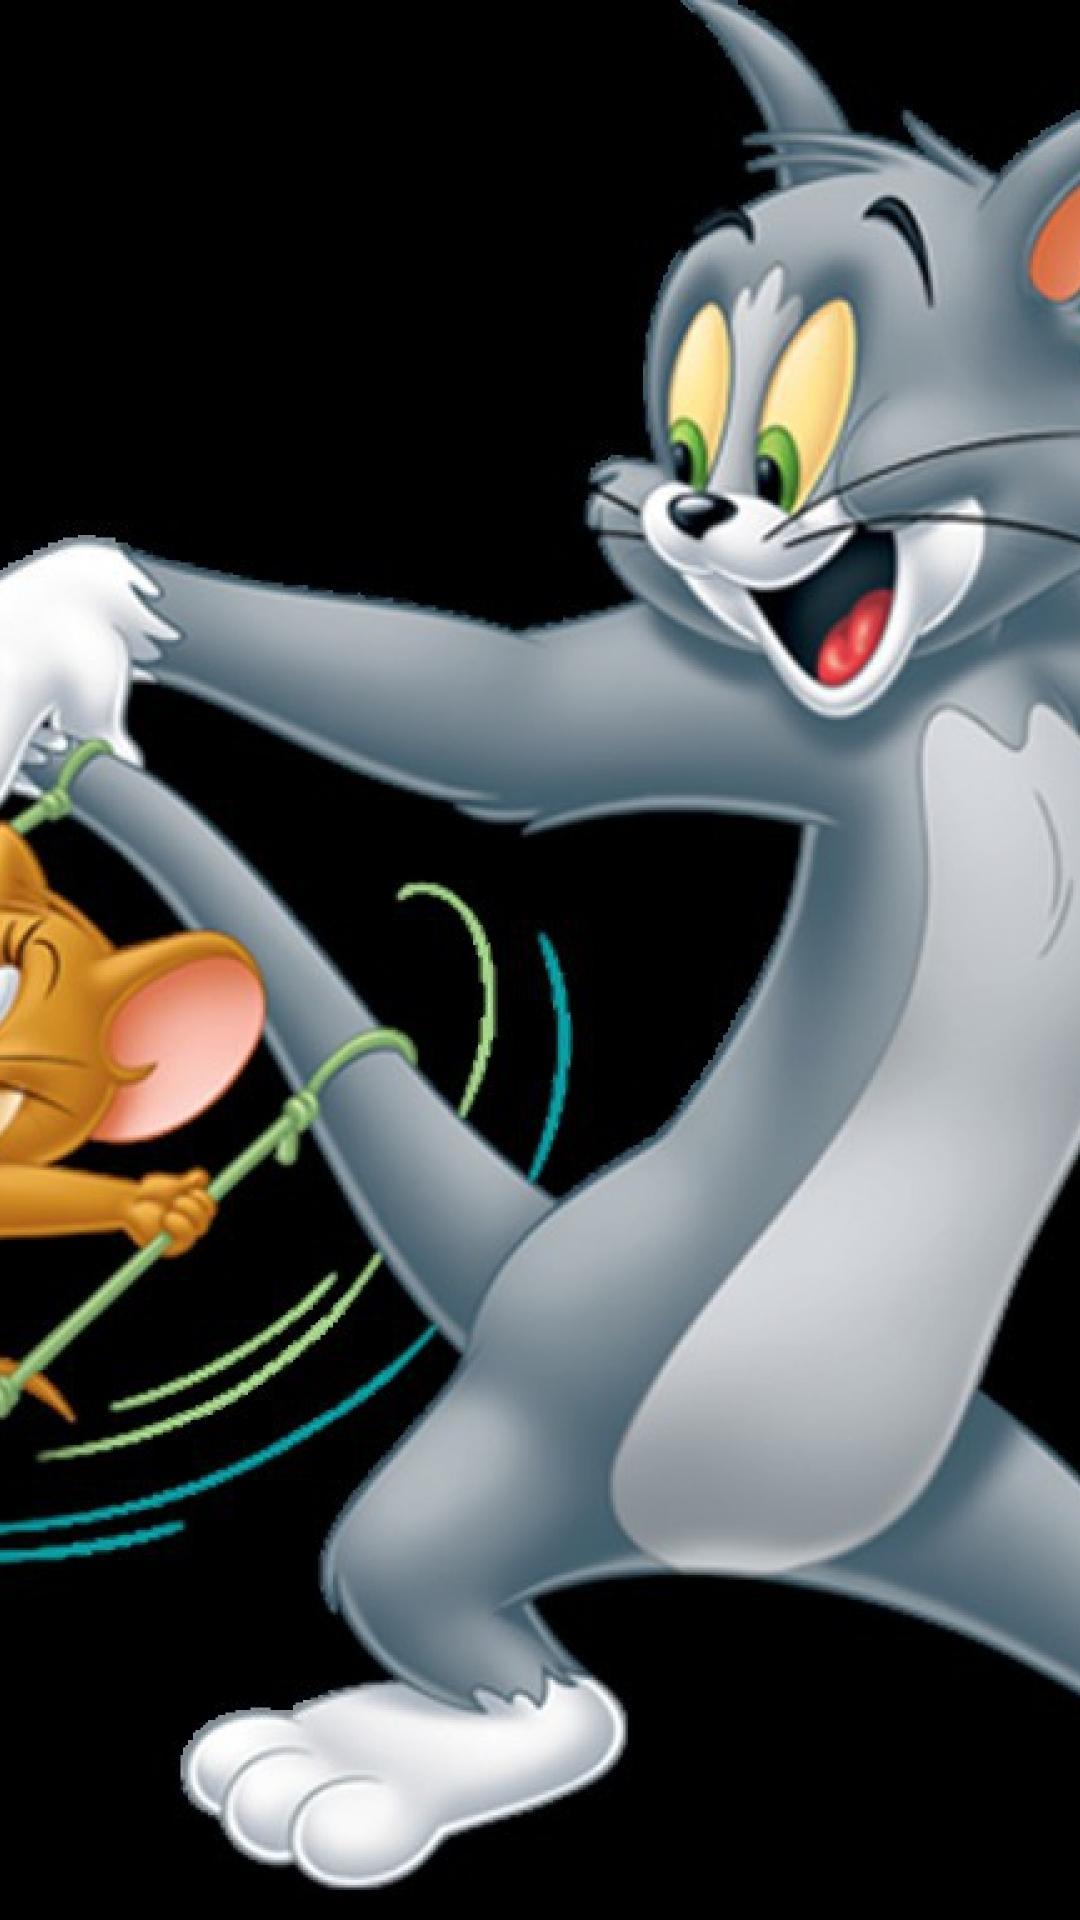 Tom And Jerry HD Wallpaper For Mobile, image